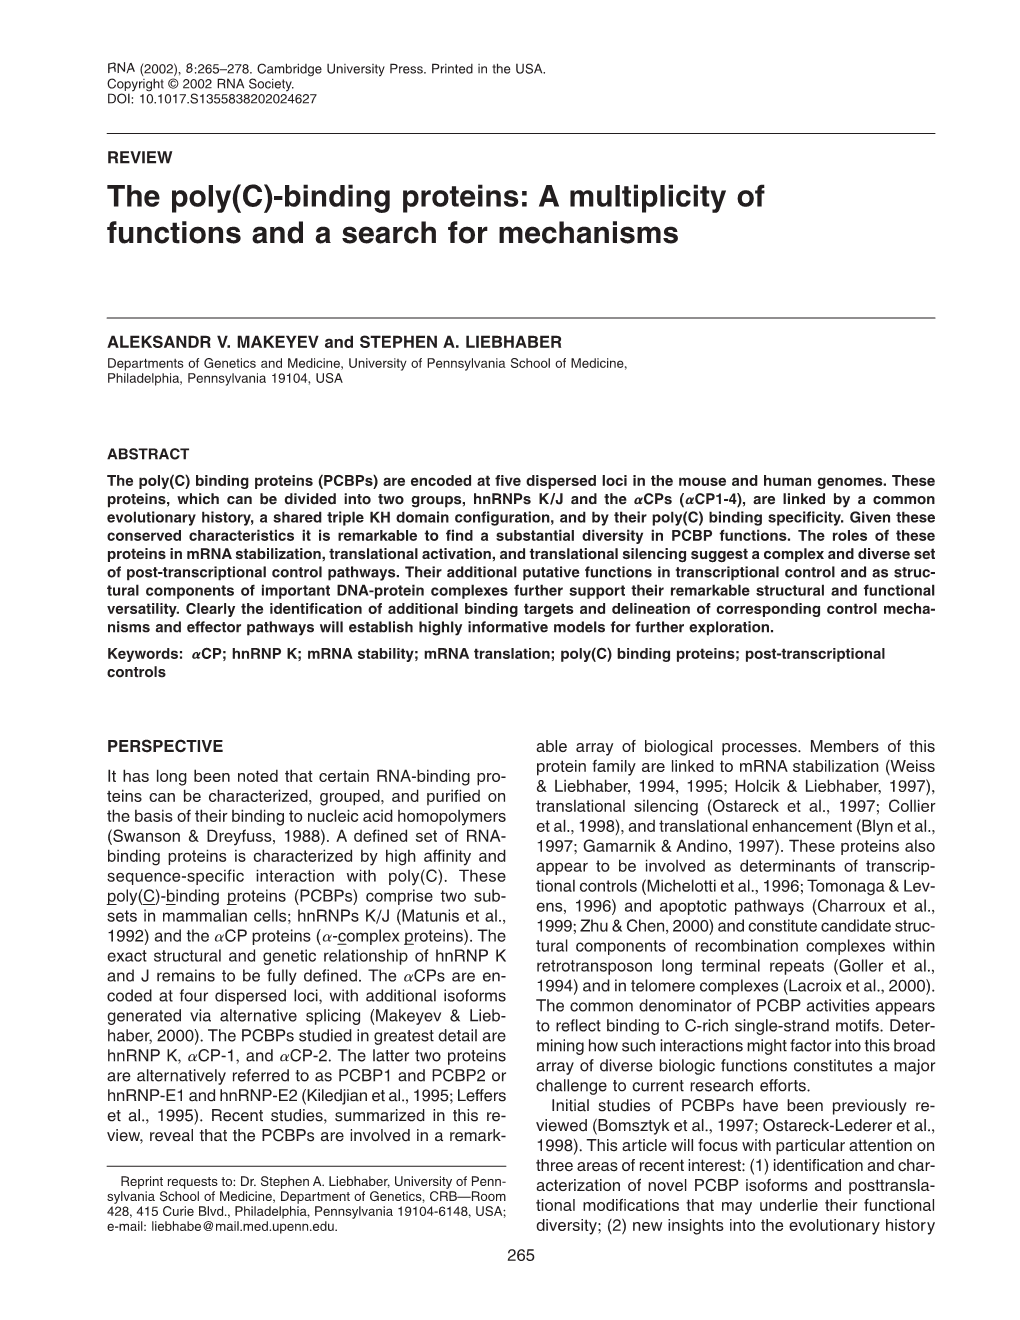 The Poly(C)-Binding Proteins: a Multiplicity of Functions and a Search for Mechanisms